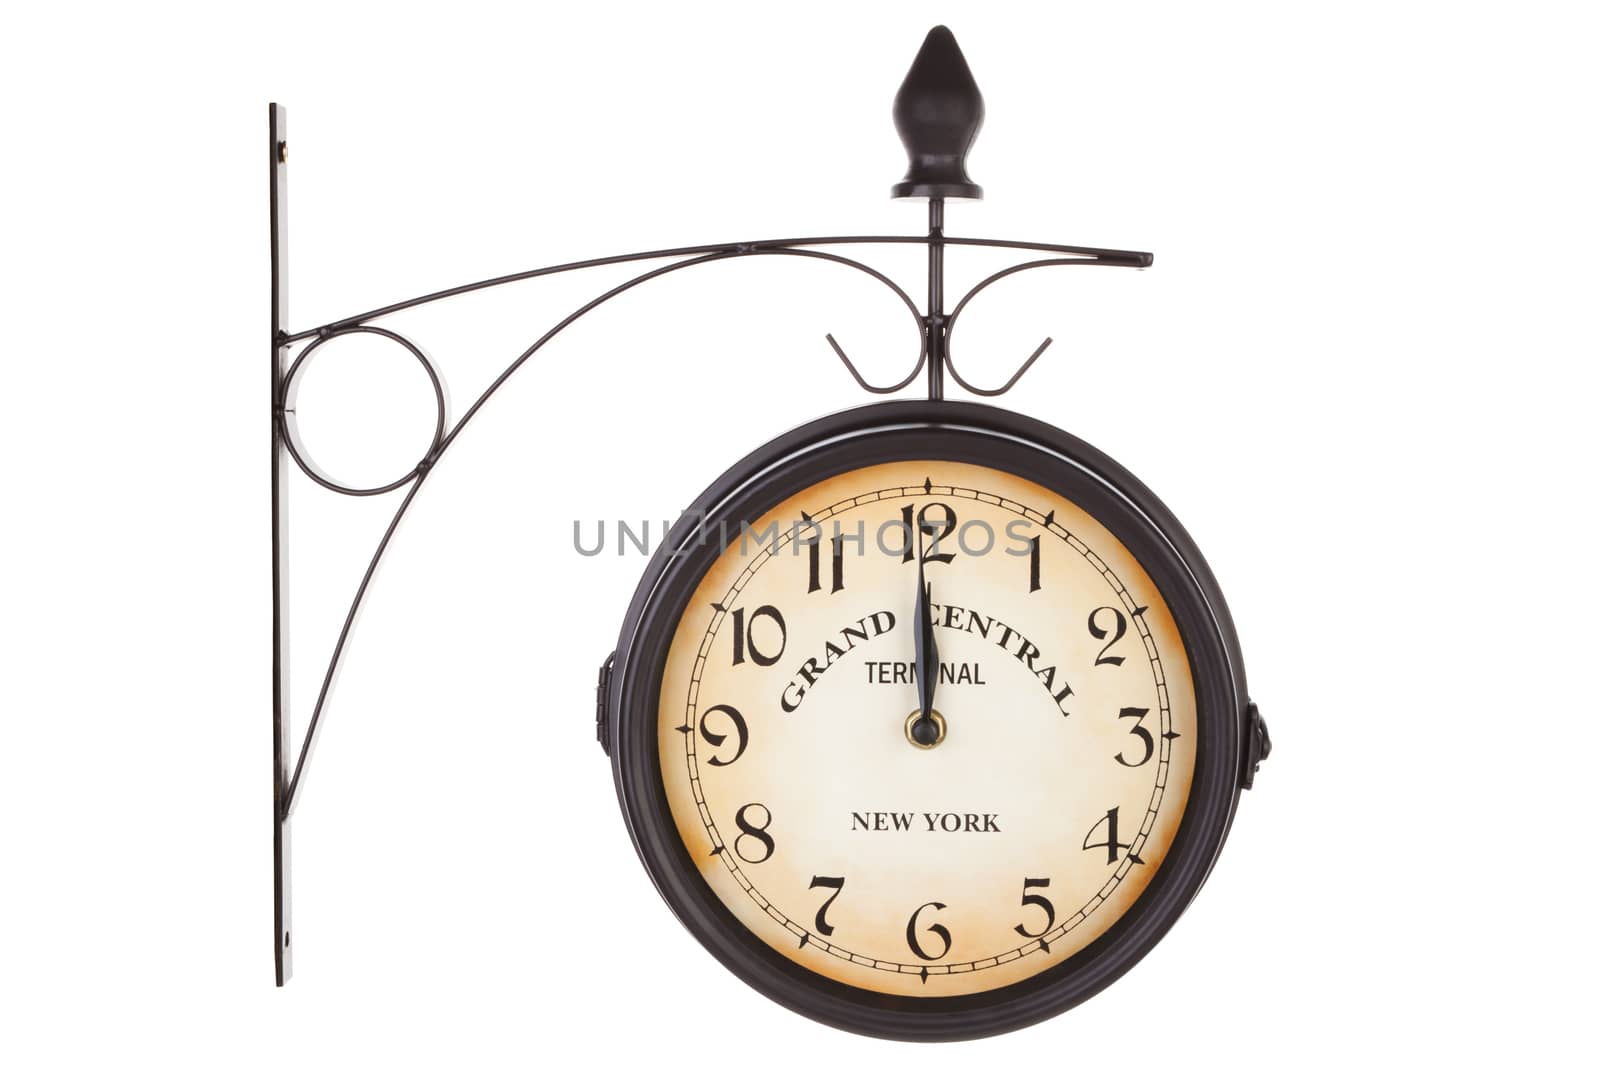 Classic vintage railway station clock isolated on white background. Retro antique timepiece.